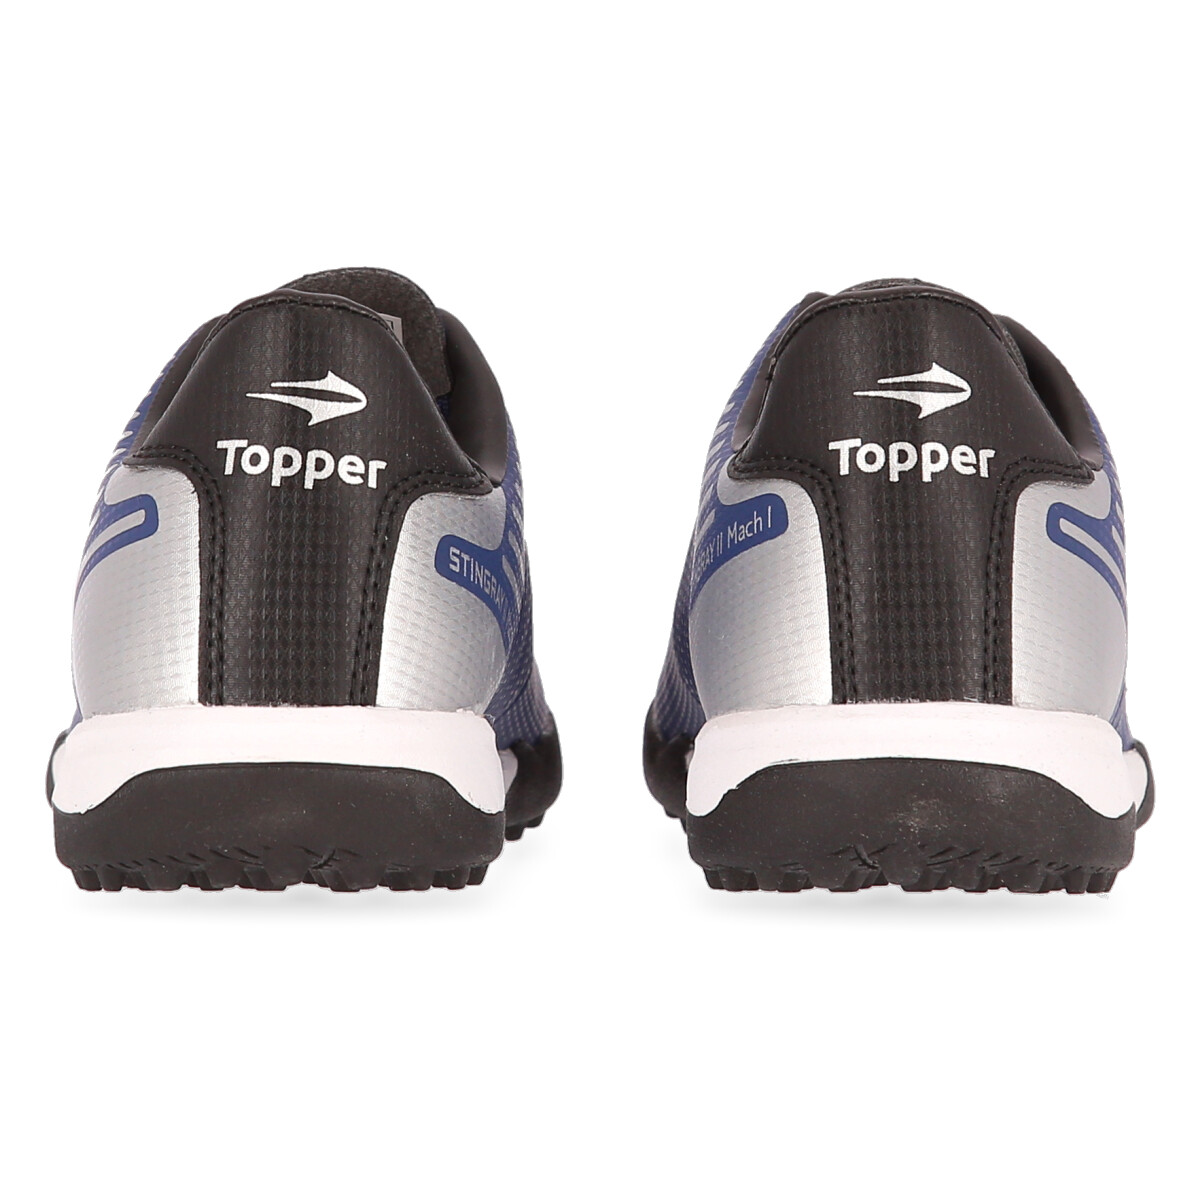 Botines Topper Stingray Ii Mach 1 Tf,  image number null